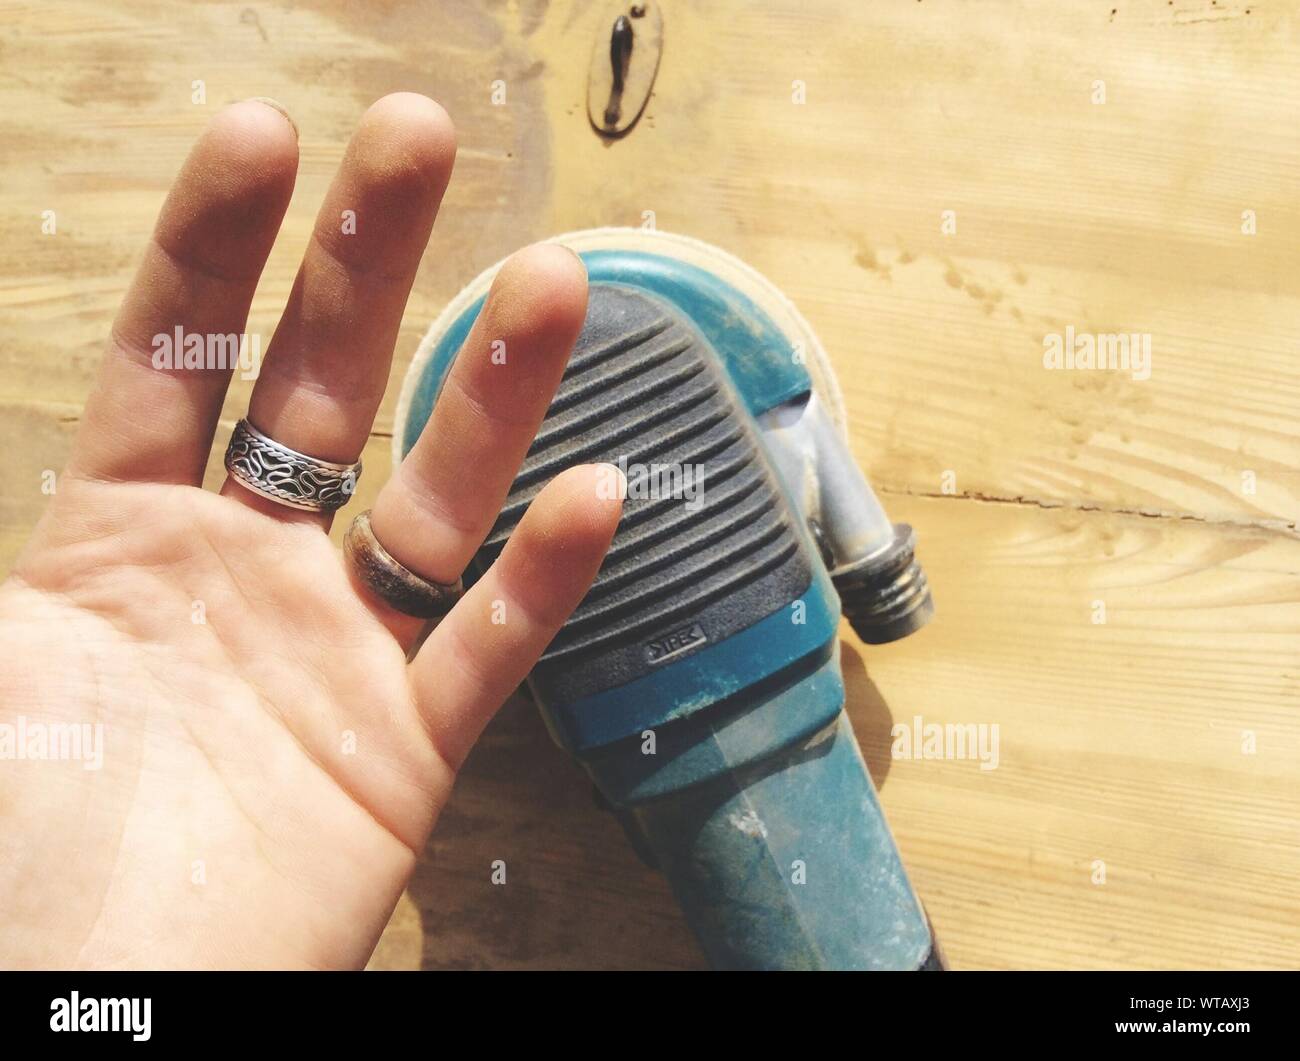 Man Showing His Hand With Sander On Wood Material Stock Photo